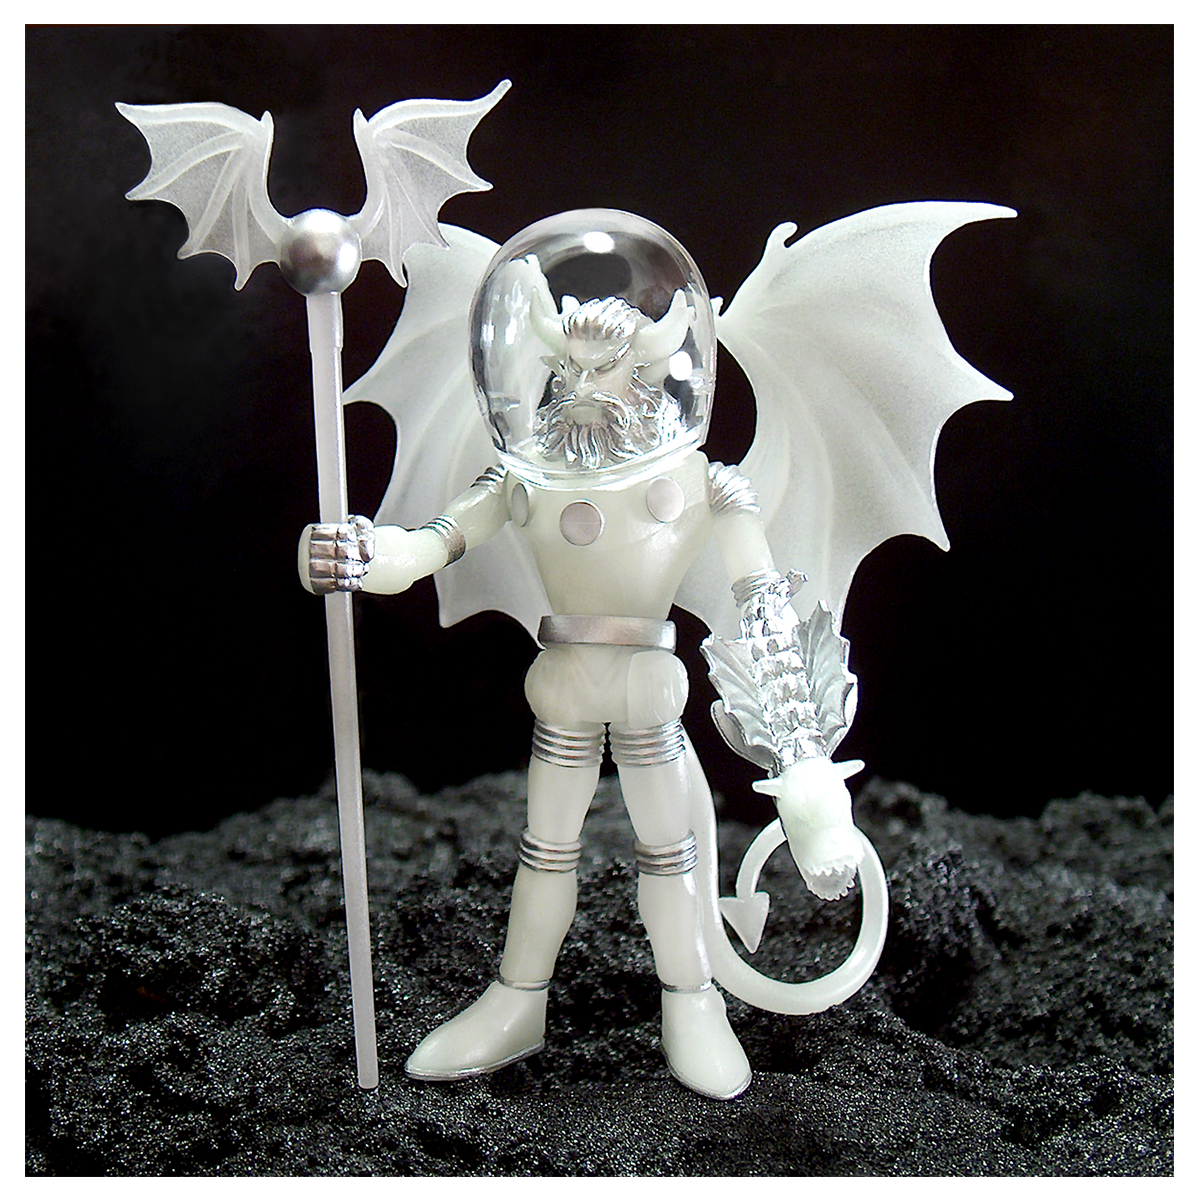 A white MYSTRON COSMIC RADIATION action figure holding a bat and a sword.